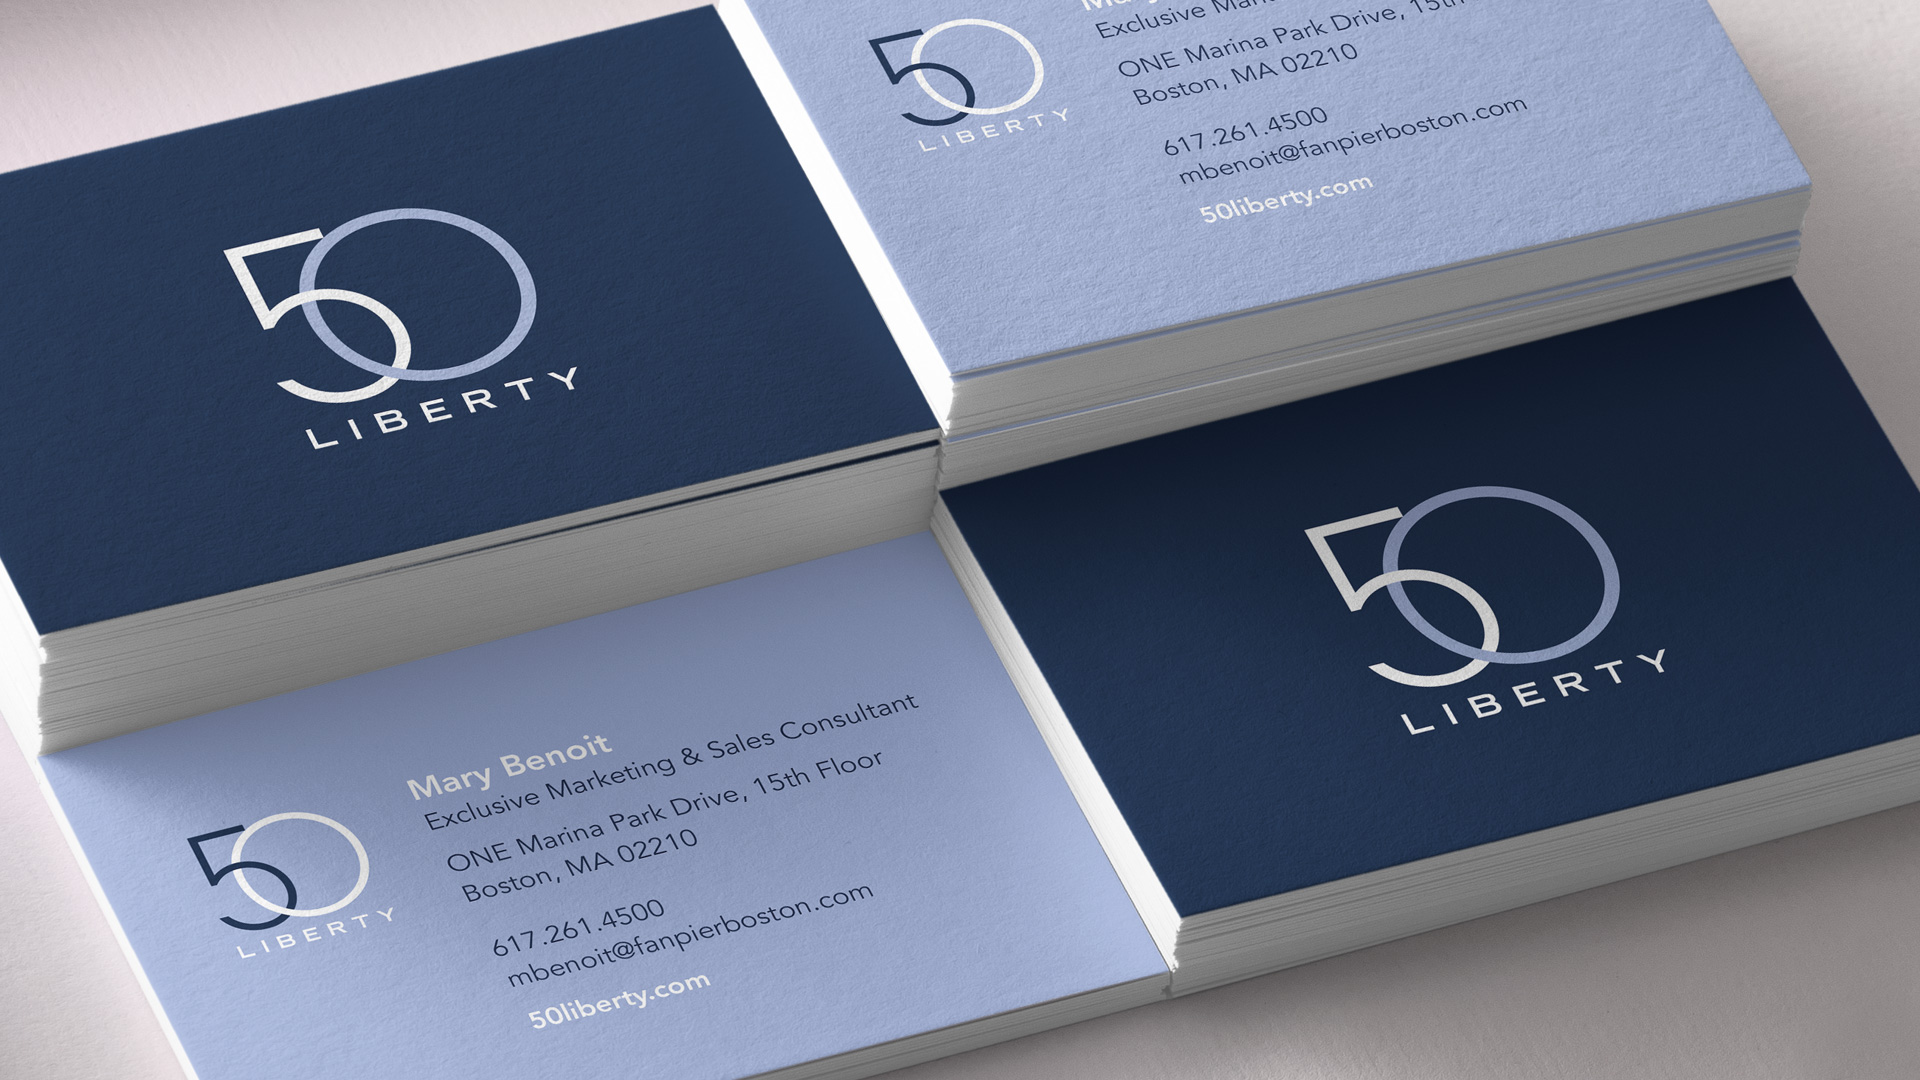 50 Liberty identity and business cards